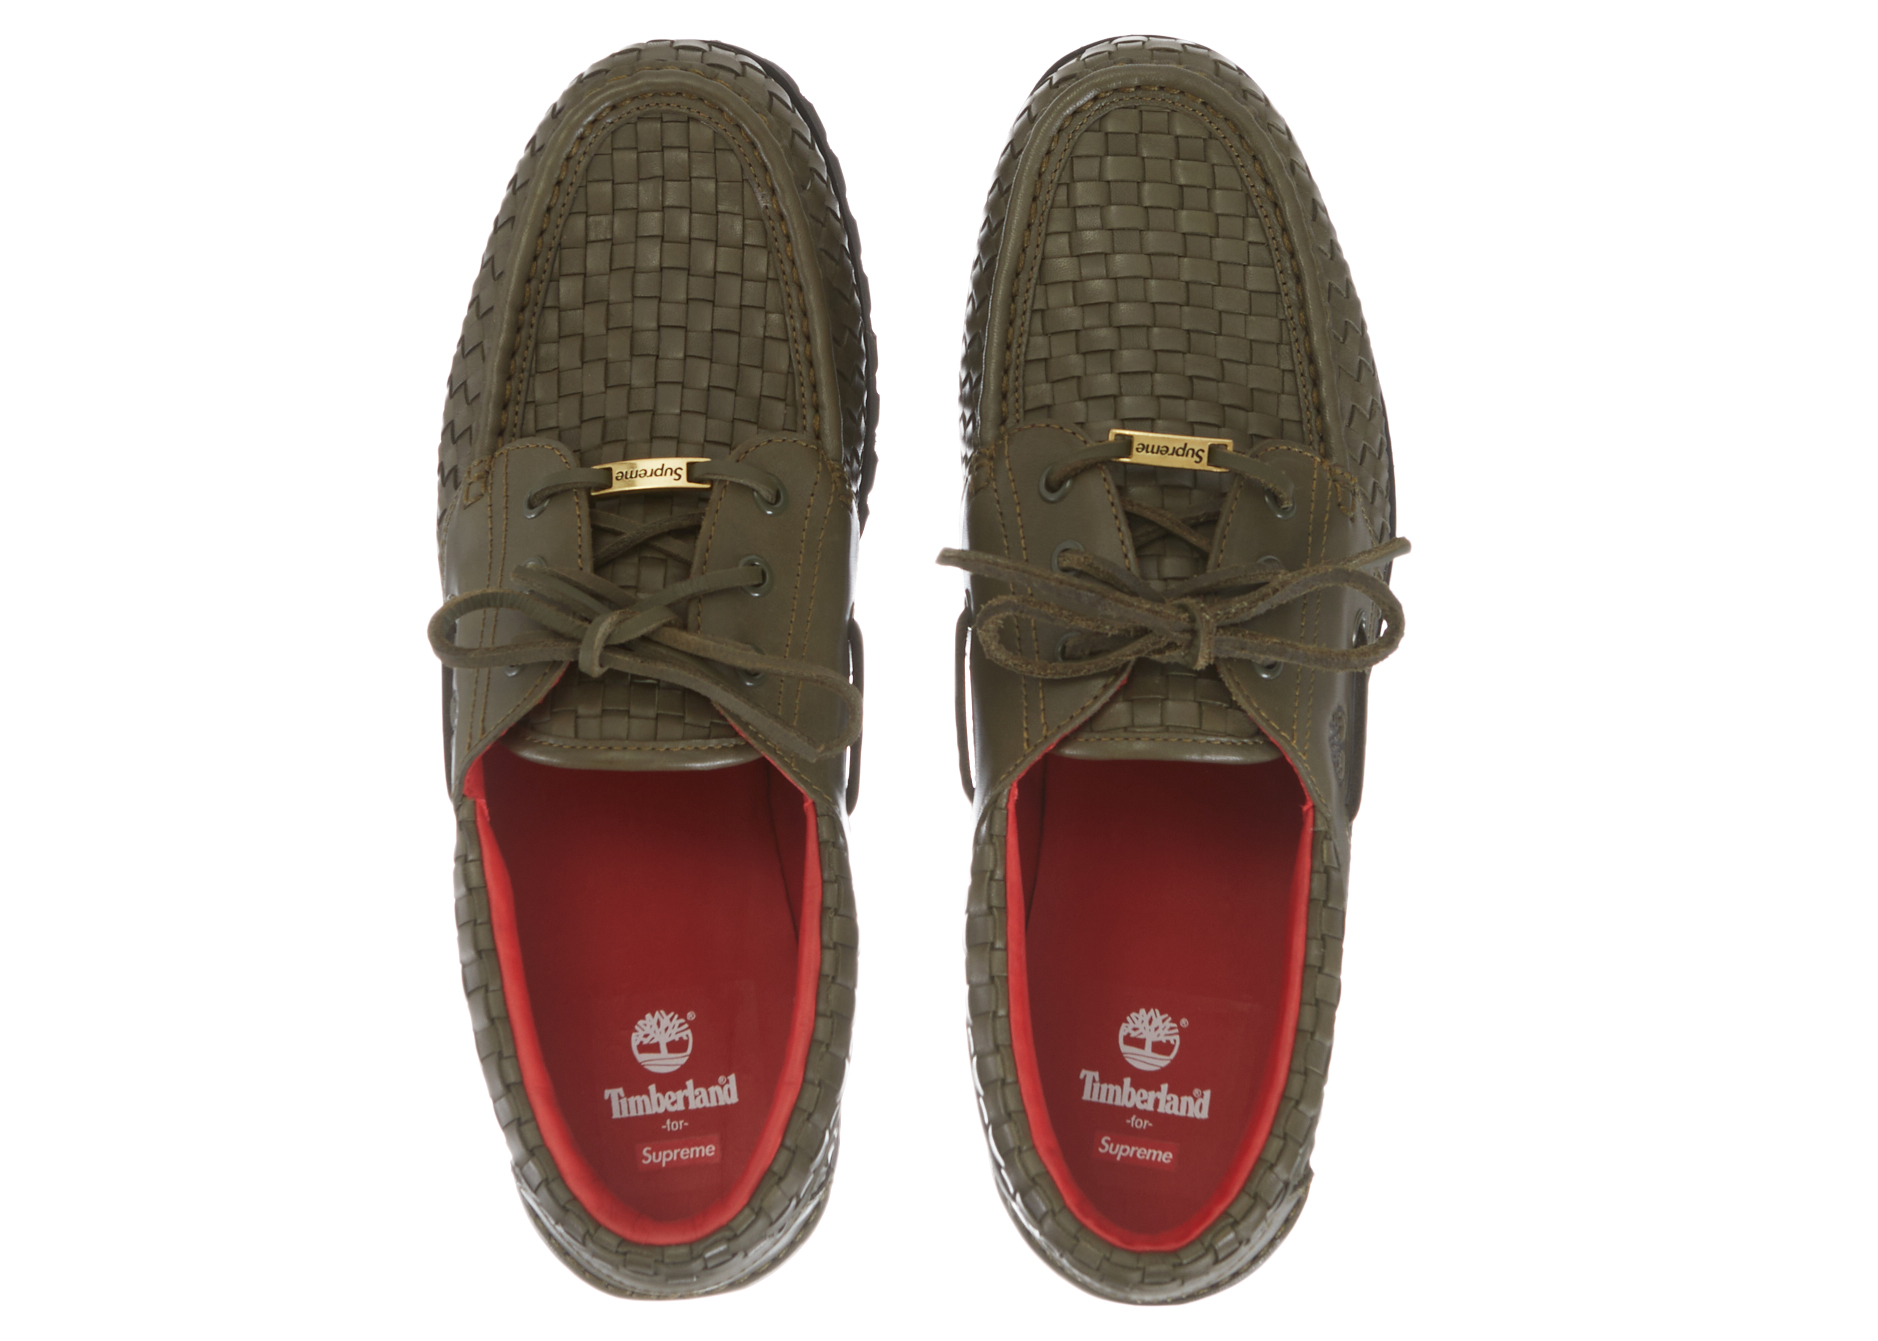 Timberland Woven Leather 3-Eye Lug Supreme Olive Men's - Sneakers - US